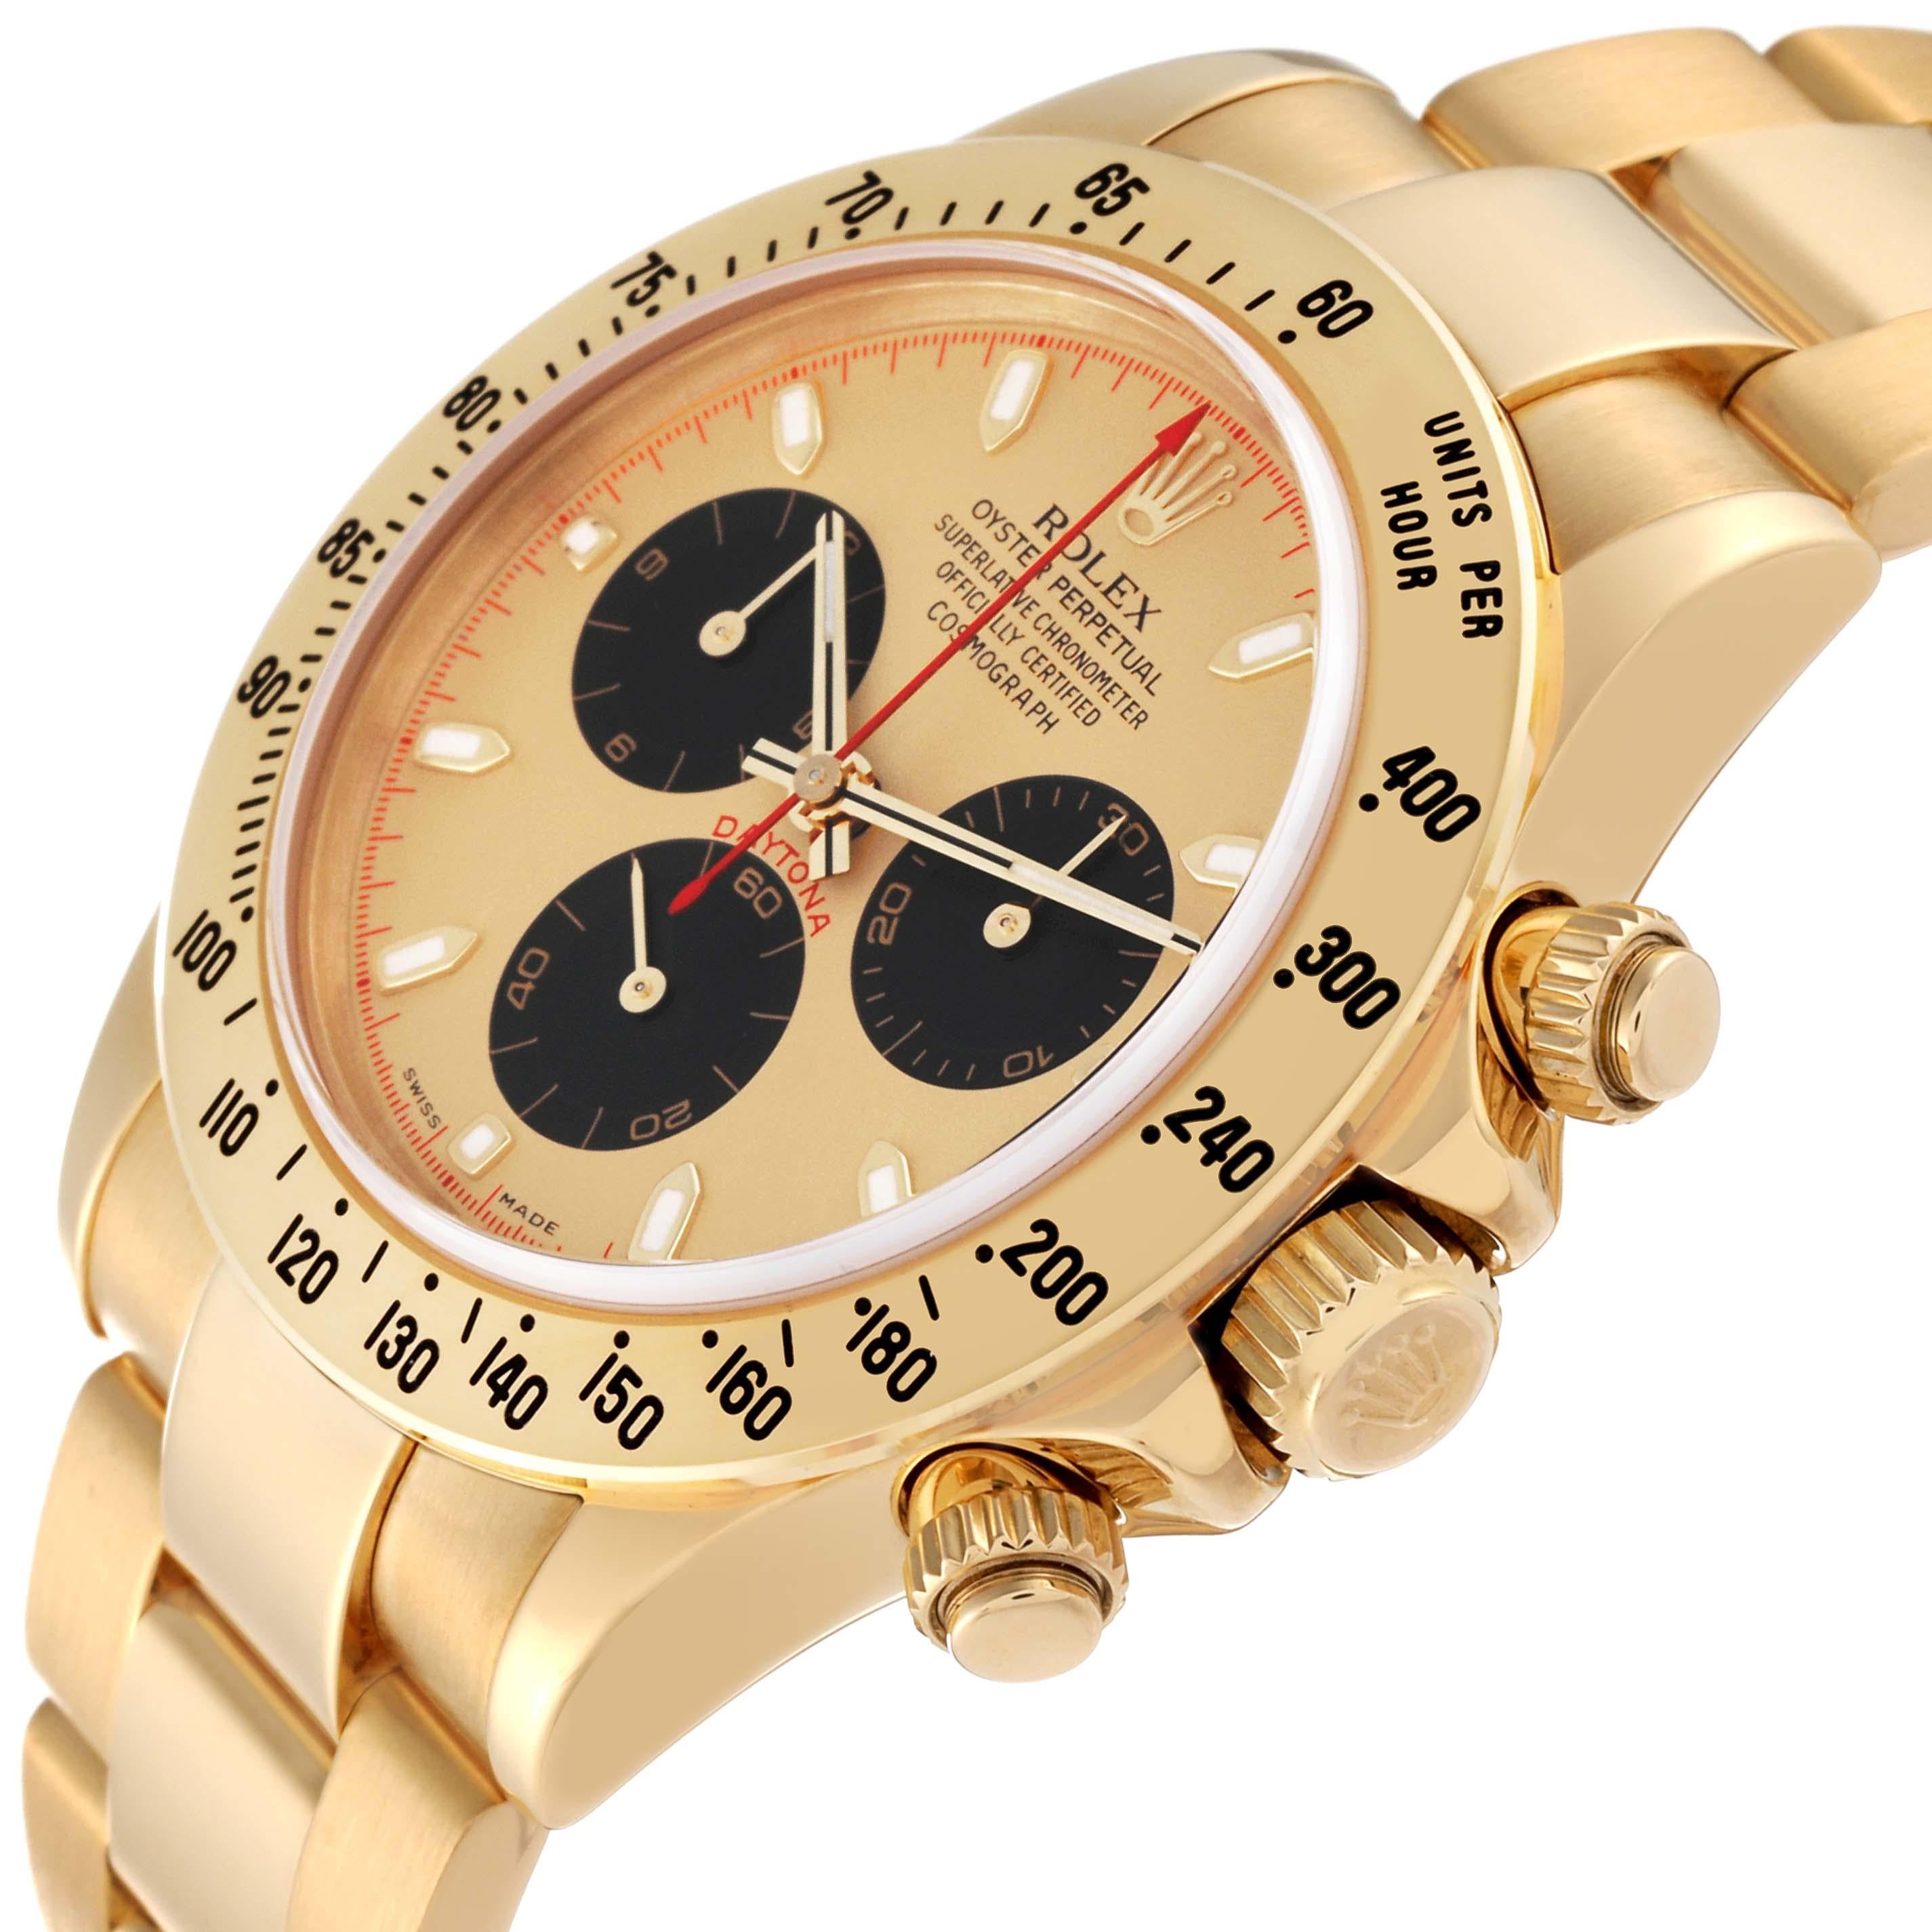 Men's Rolex Daytona Yellow Gold Champagne Dial Mens Watch 116528 Box Papers For Sale